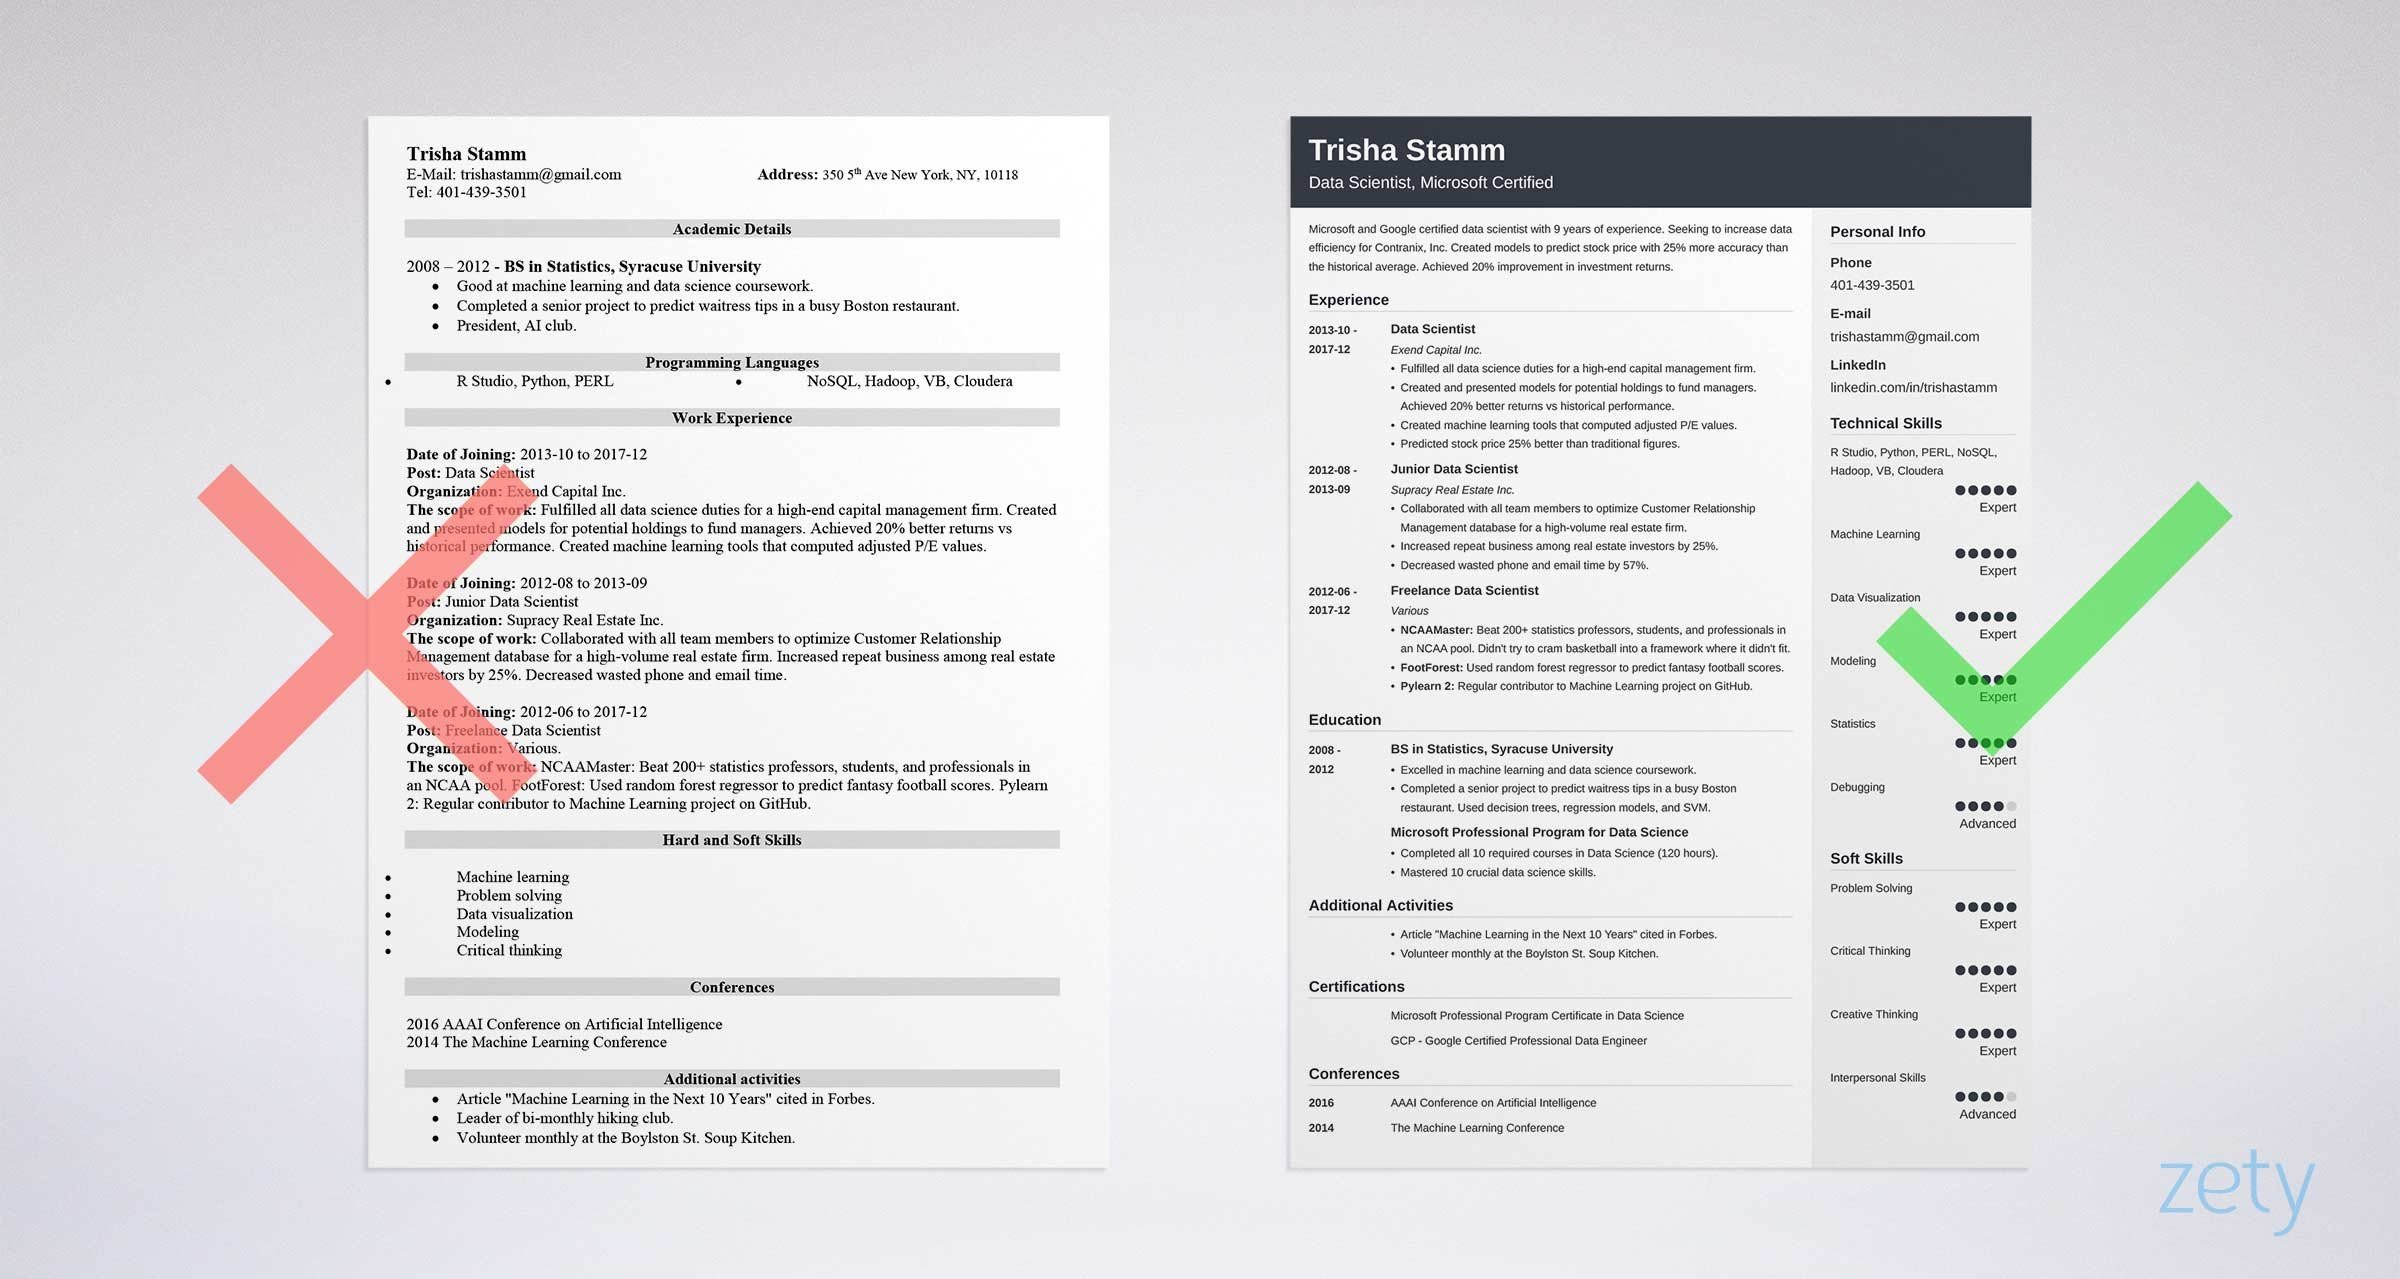 Data Science Resume Sample for Experienced Data Scientist Resume Sample Template & Data-driven Guide